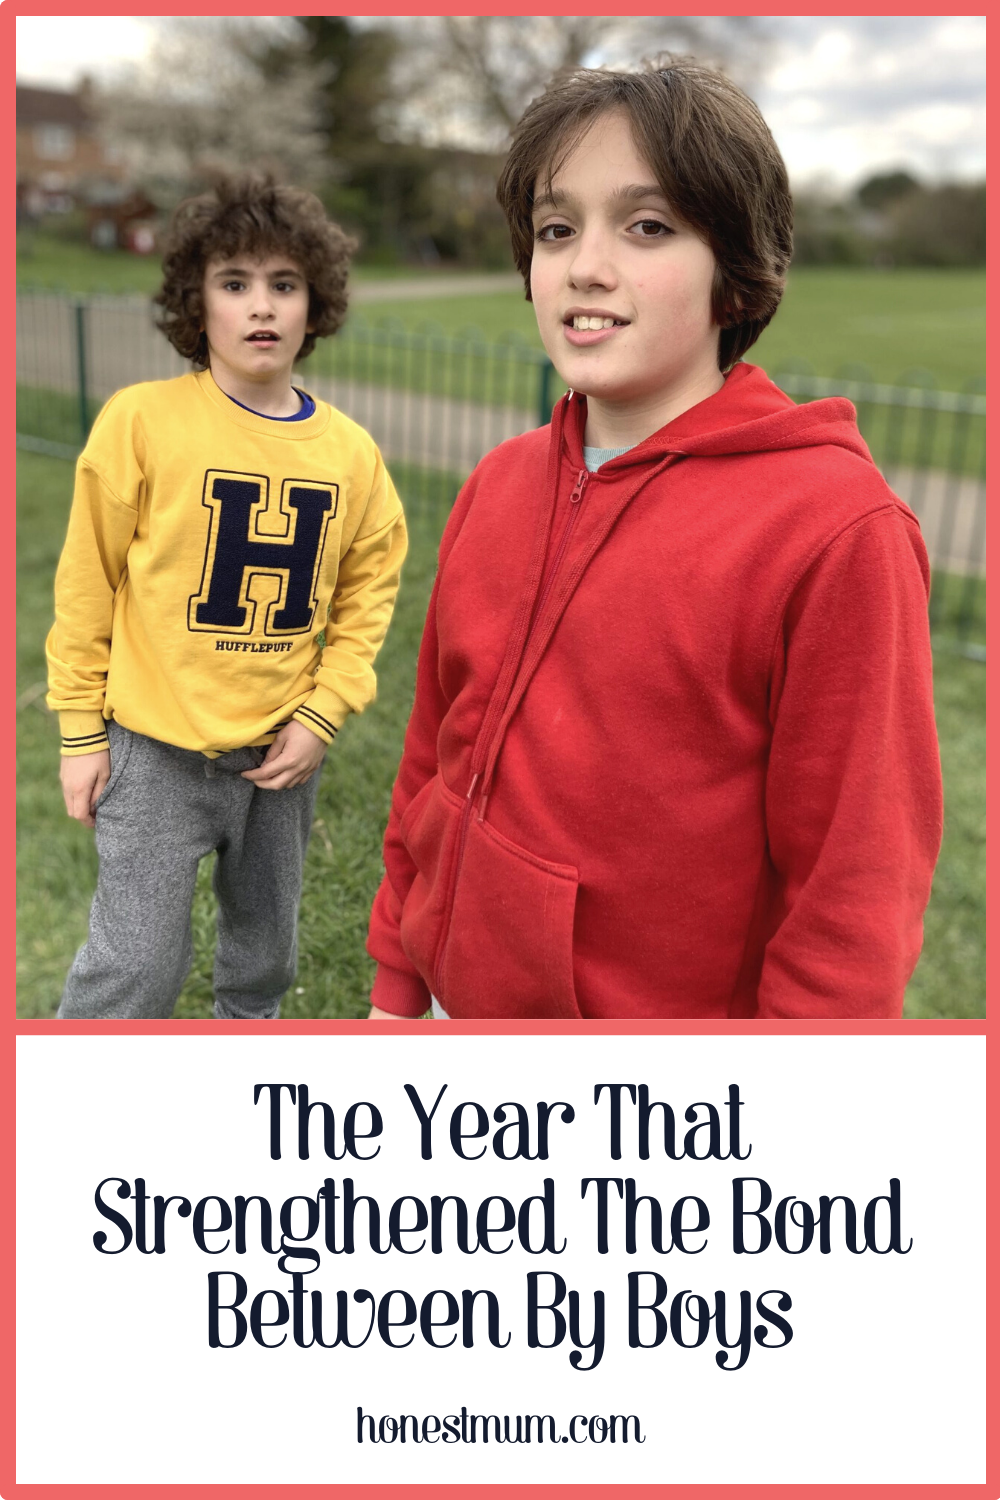 The Year That Strengthened The Bond Between By Boys | HonestMum